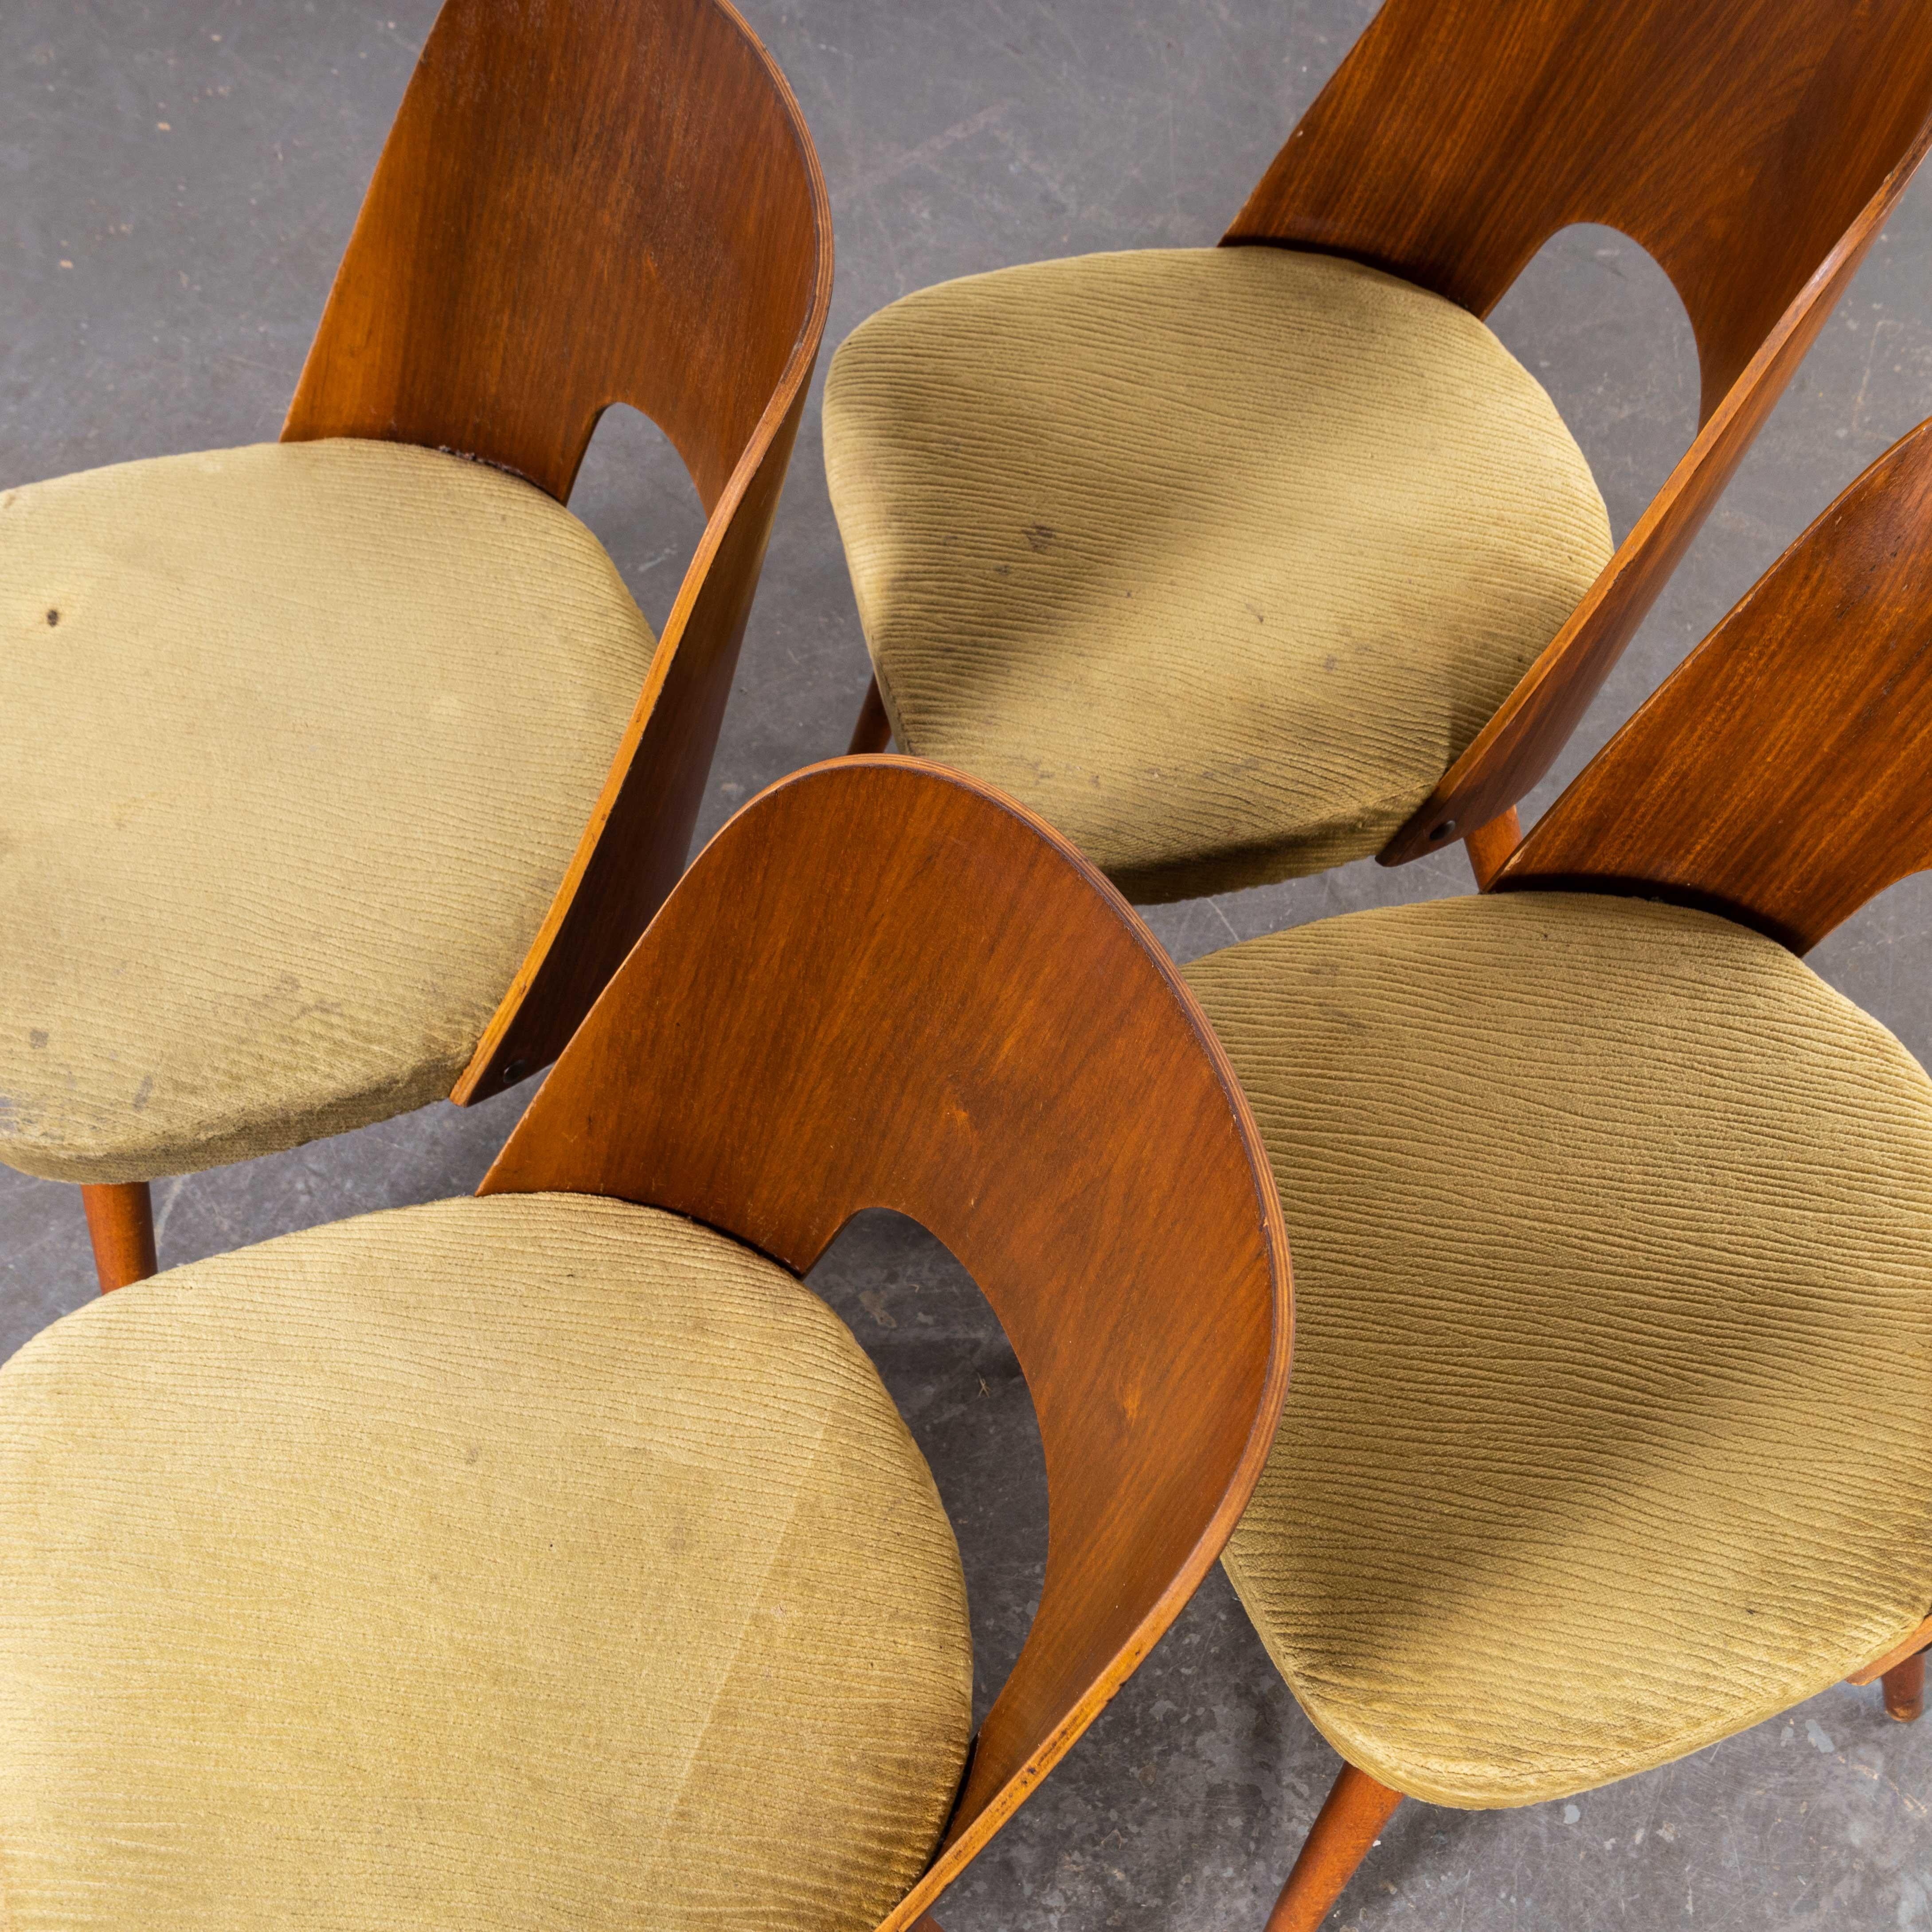 1960’s set of four upholstered dining chairs – Oswald Haerdtl (1929)
1960’s set of four upholstered dining chairs – Oswald Haerdtl (1929). These chairs were produced by the famous Czech firm Ton, still trading today and producing beautiful